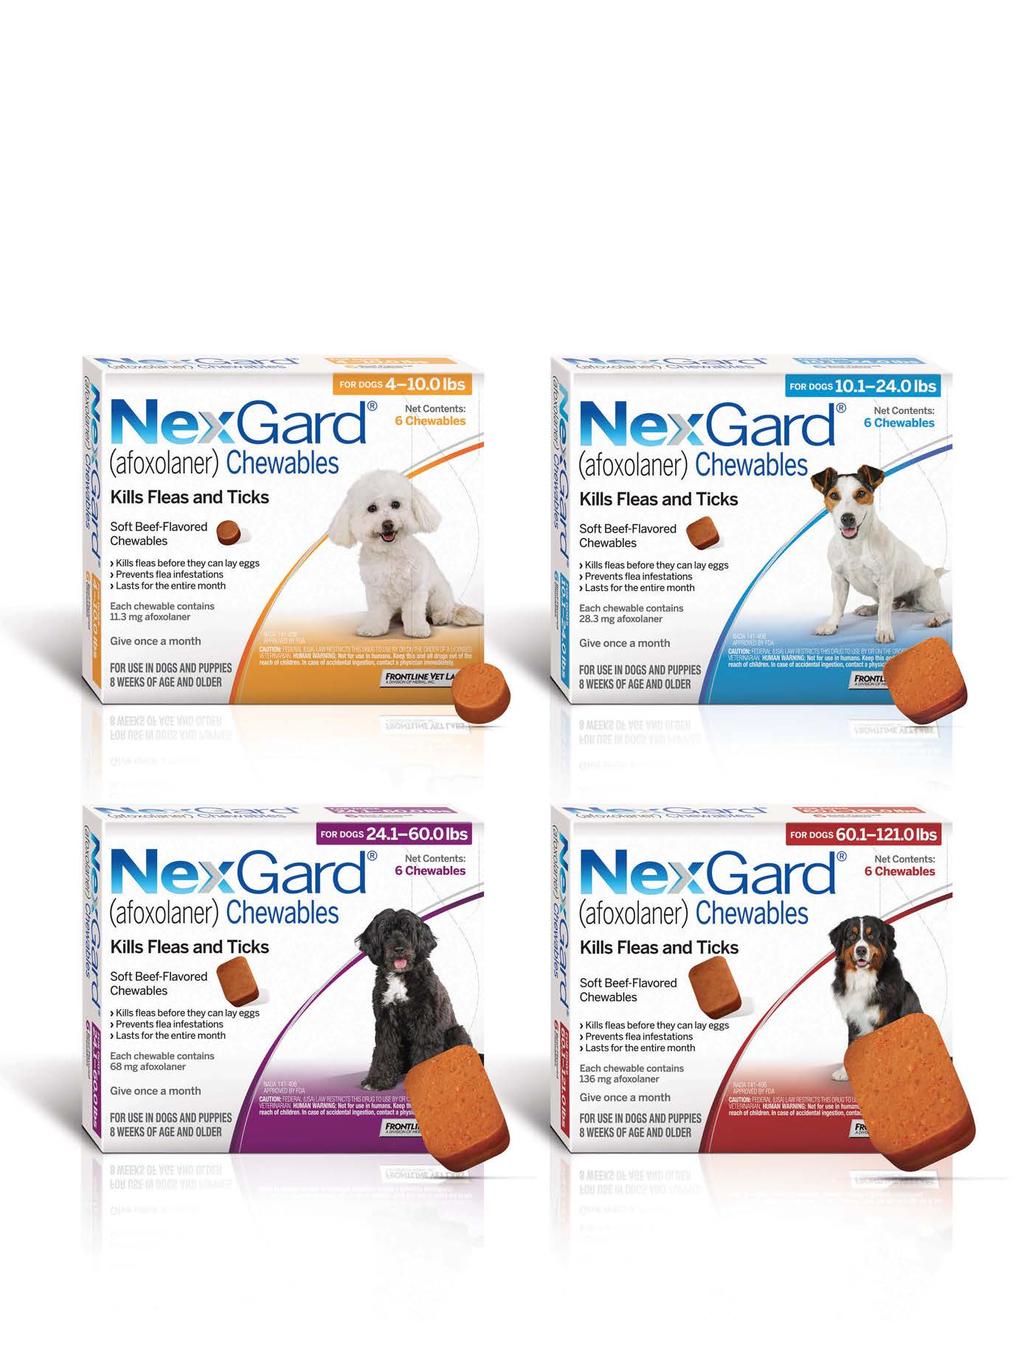 Easy to give, easy to stock. NexGard is available in 4 sizes (both 3 packs and 6 packs): Small Dog: 4-10.0lbs Medium Dog: 10.1-24.